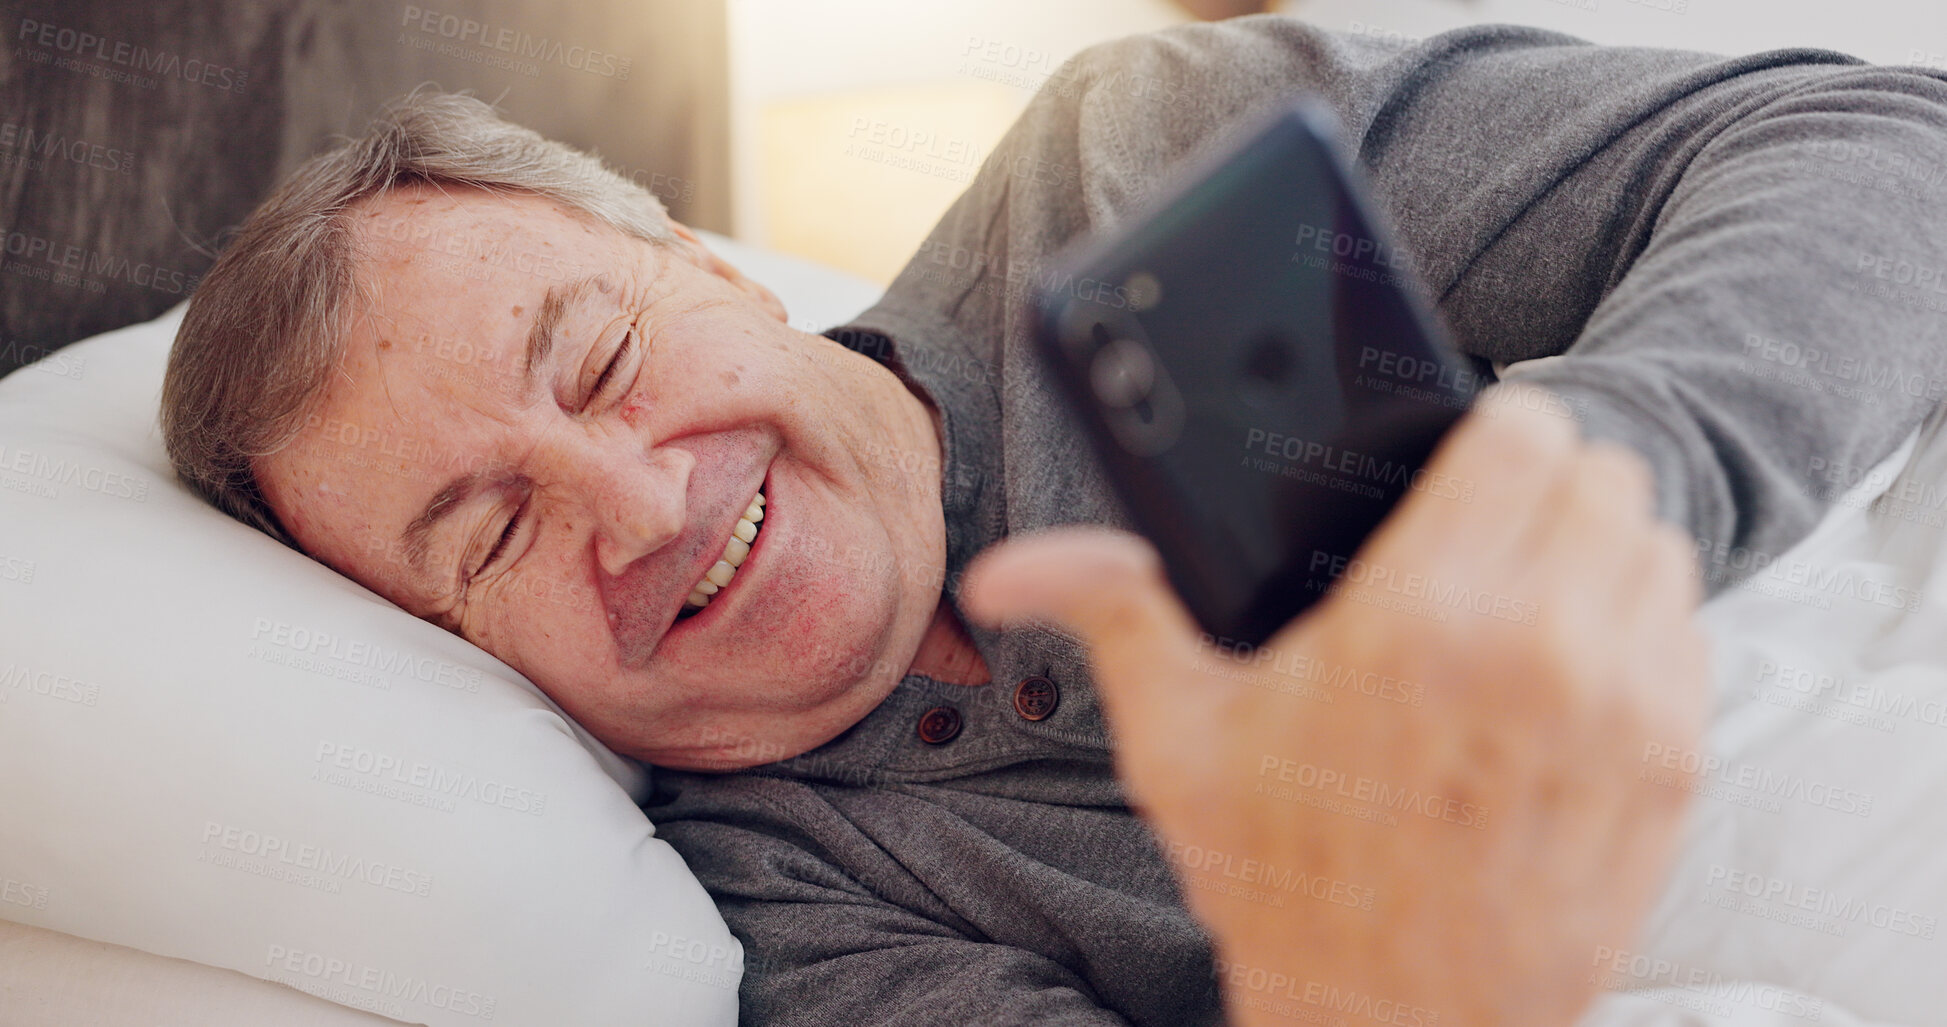 Buy stock photo Senior man, happy and reading with phone in bed or streaming funny, comedy or meme on social media. Elderly person, smile or relax with cellphone at night in bedroom with communication or online chat